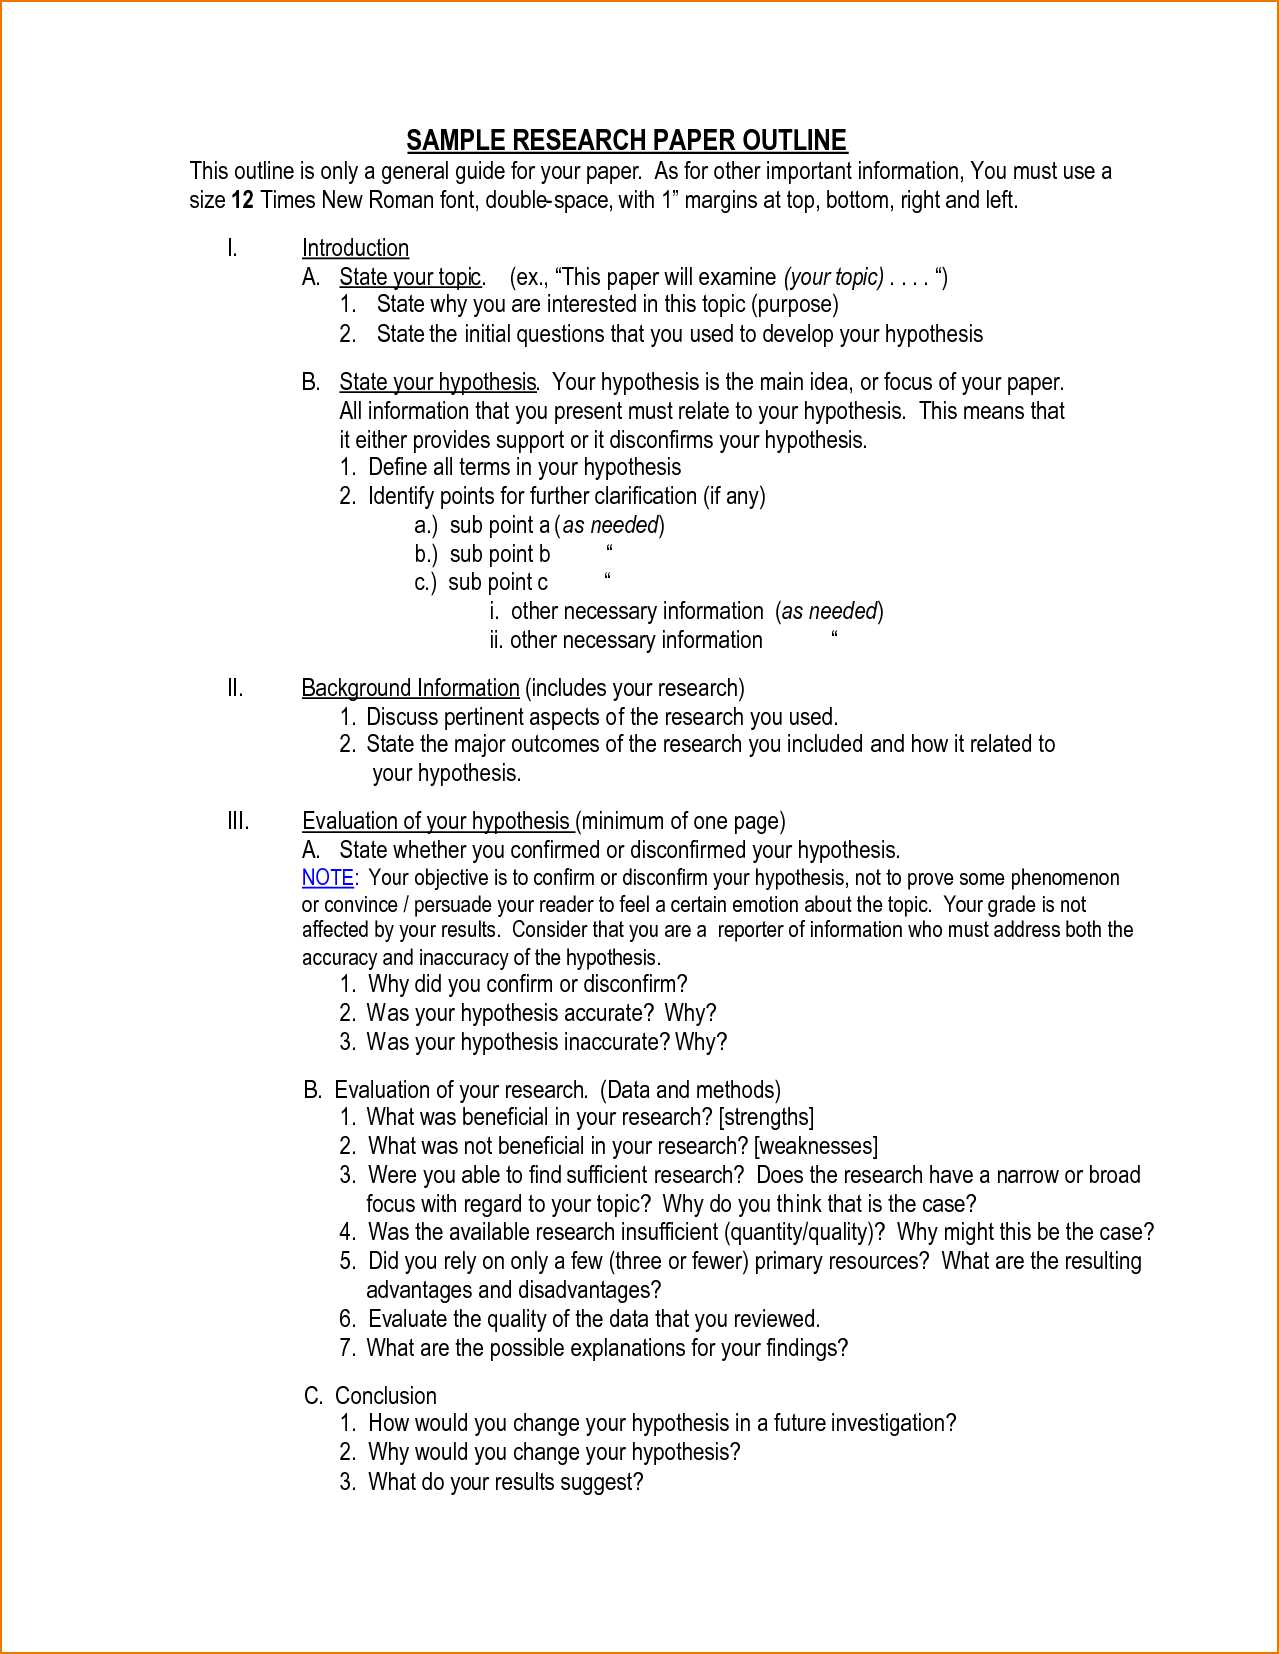 Bill Of Rights Amendments Worksheet as Well as Outlines for Essay Essay Outline Template Examples Of format and